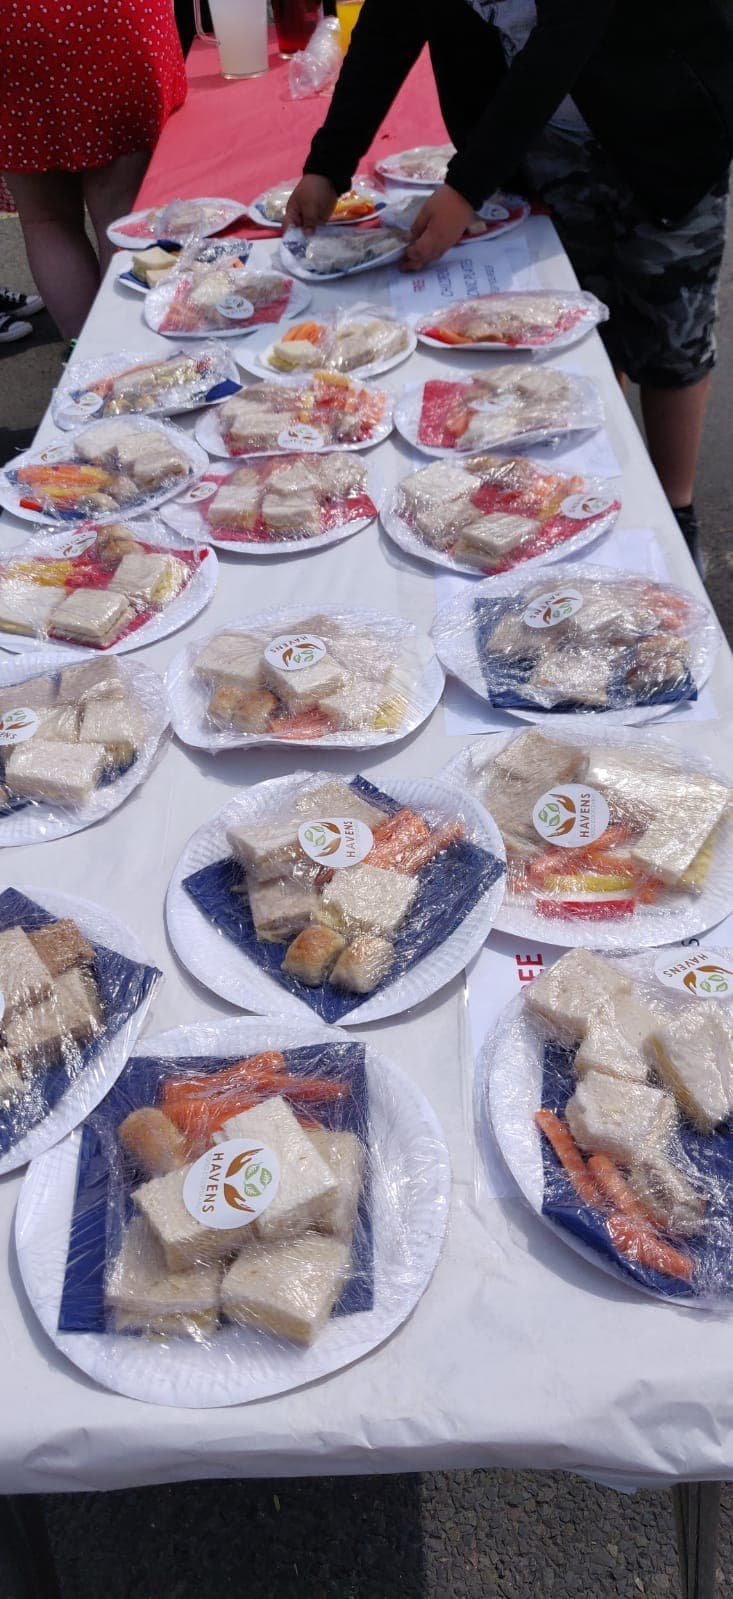 Picnic plates, made using surplus food fromt the Havens Food Cooperative- distributed at the Jubilee Street Party, Denton, 2022.jpg